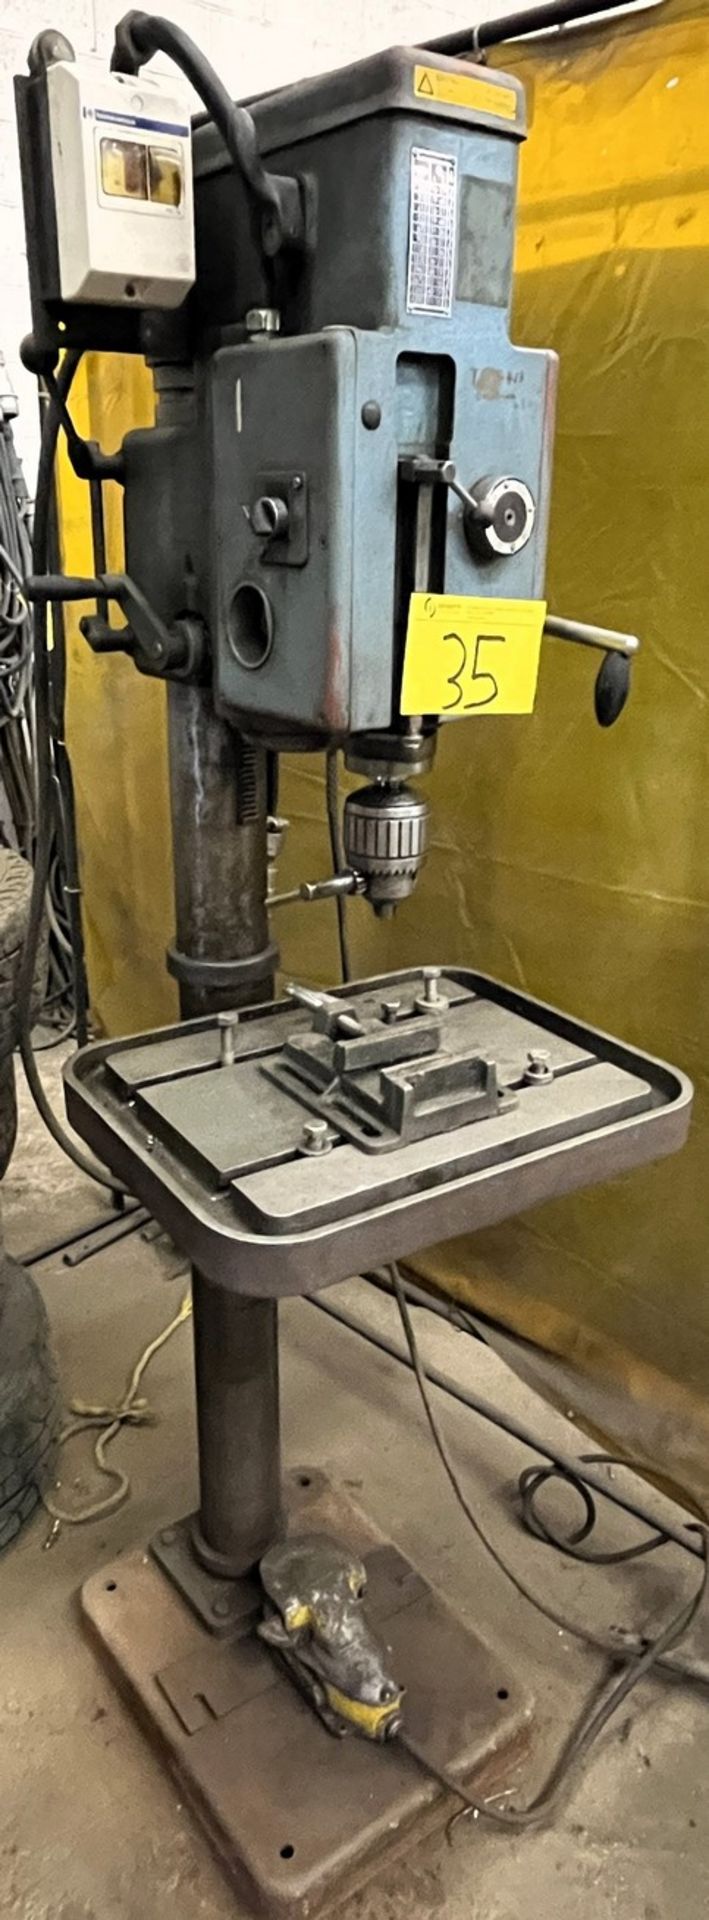 AB ARBOGA GM 2512 GEAR HEAD DRILL PRESS, VARIABLE SPEED, AUTOMATIC FEED W/ JACOB CHUCK AND VISE ( - Image 2 of 4